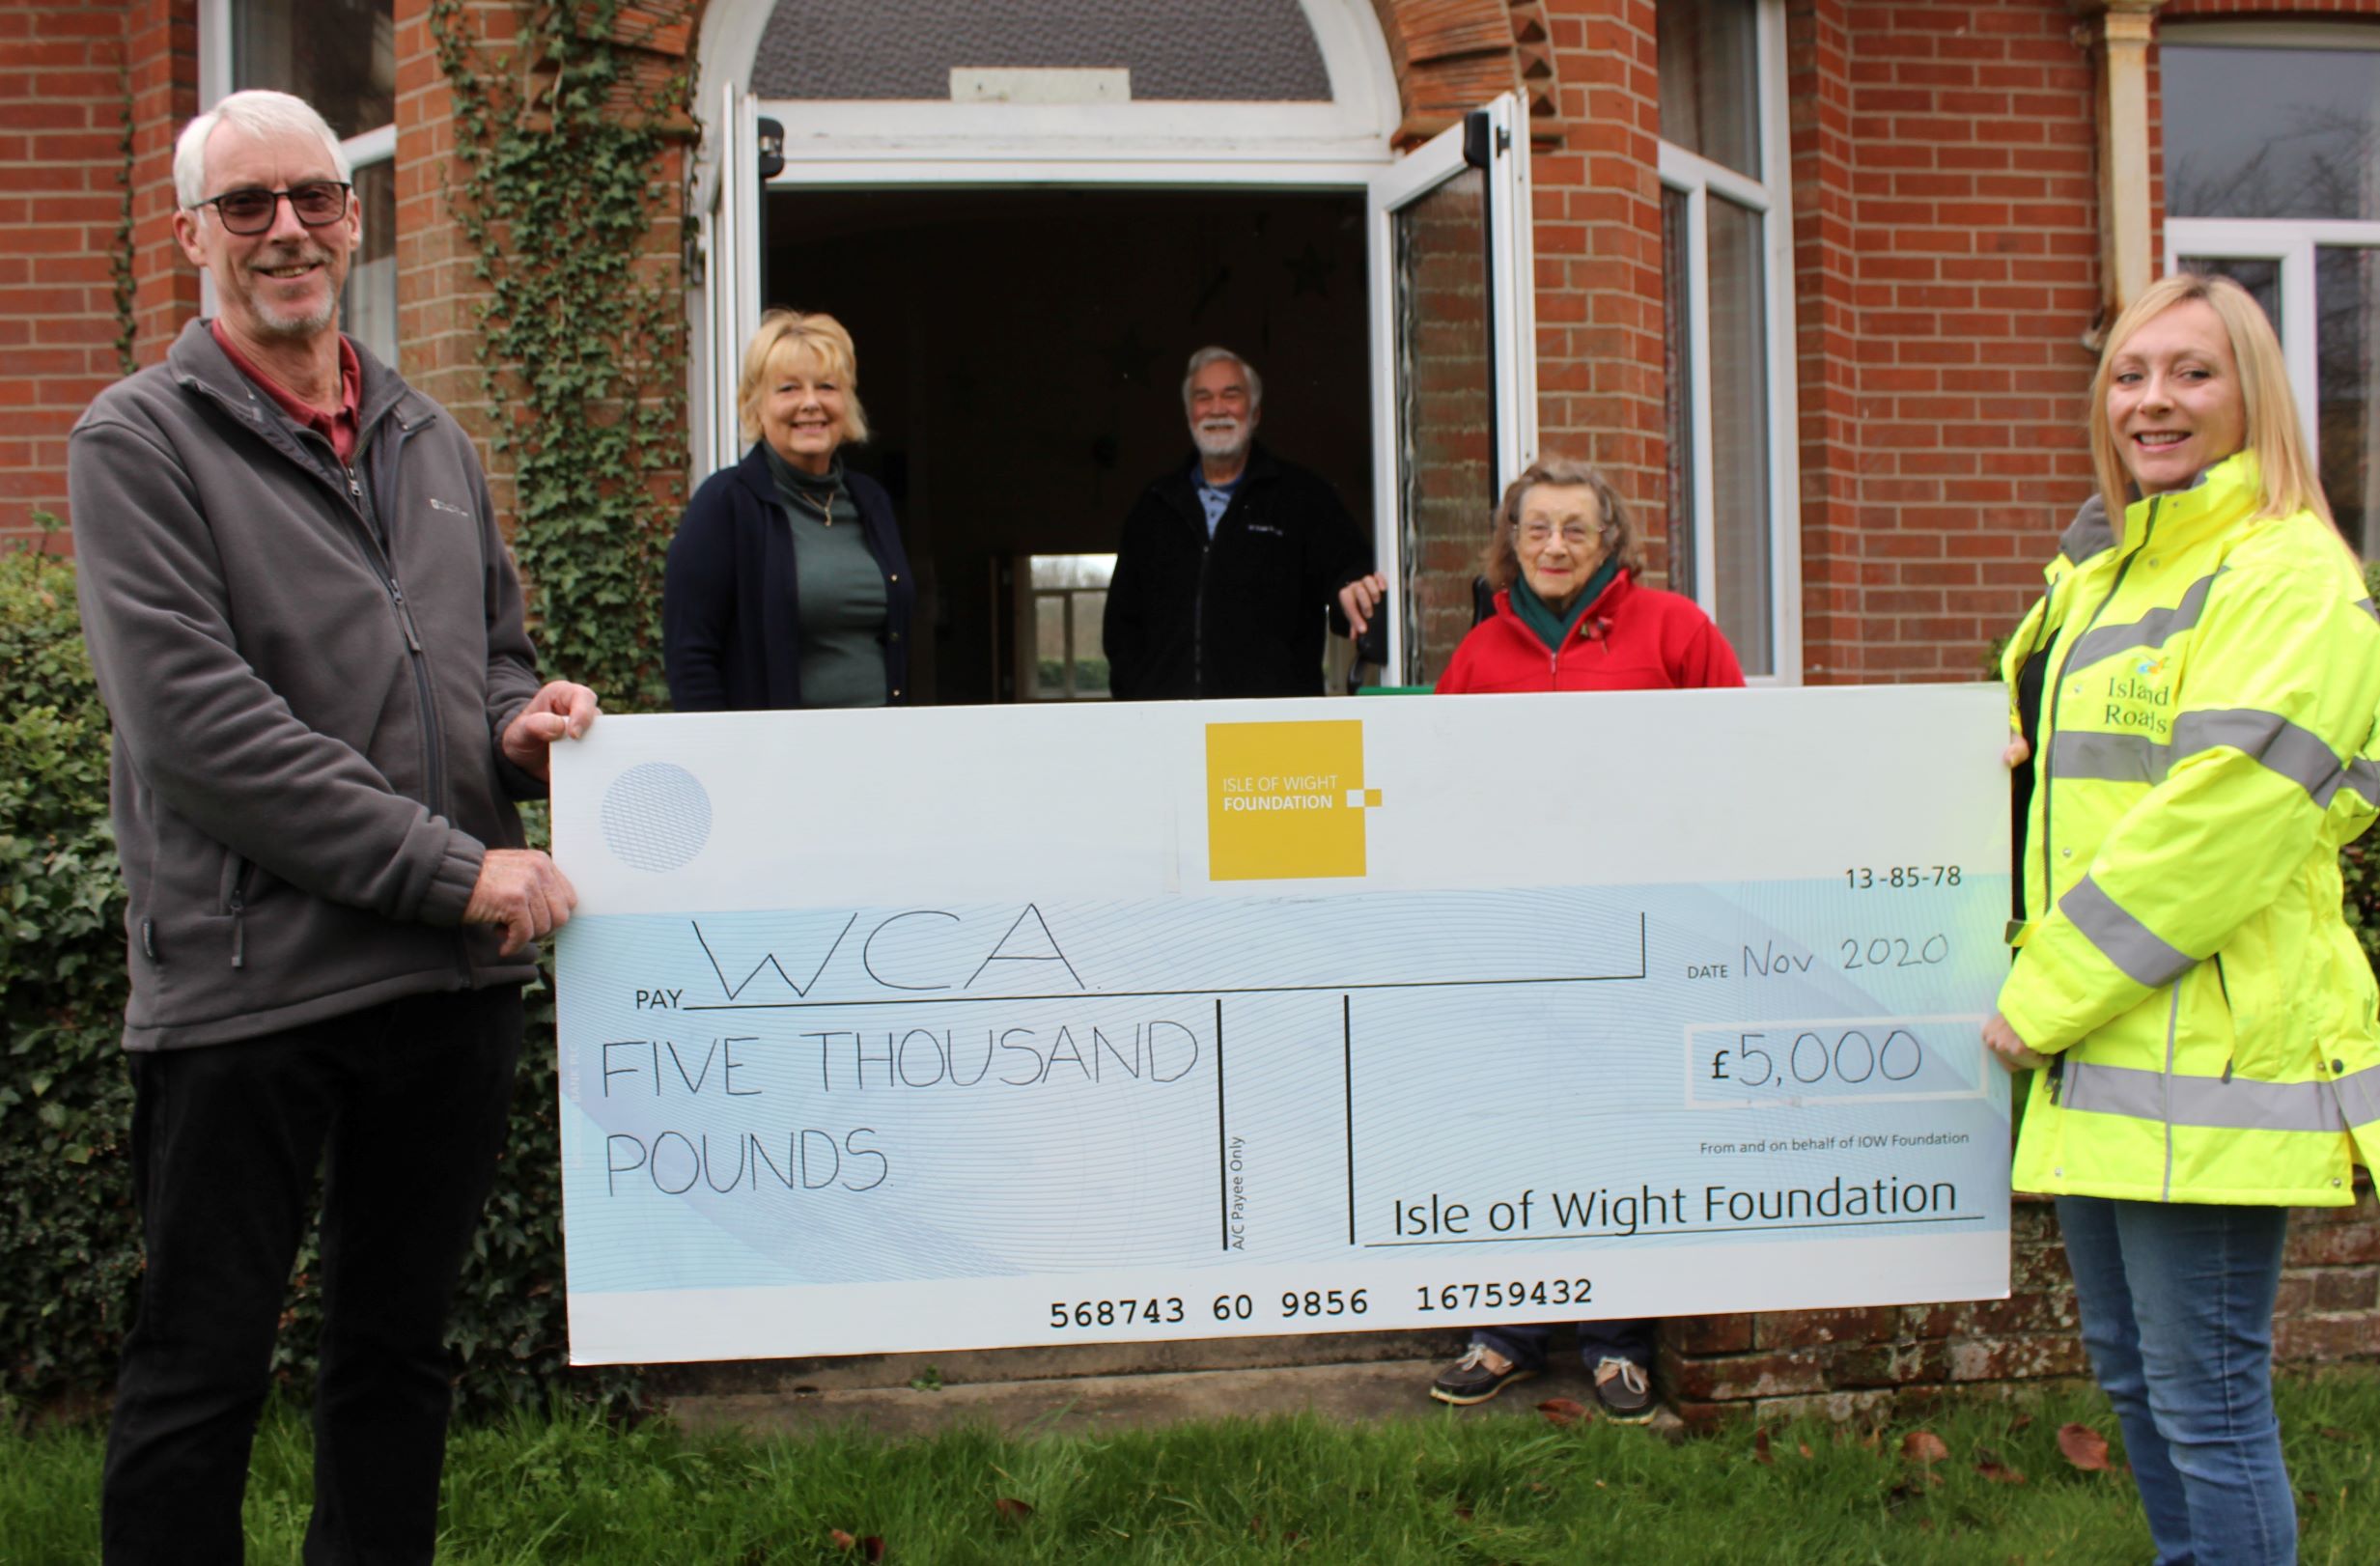 Photo showing Island Roads employee and members of the Whippingham Community Association holding a large cheque from the Isle of Wight Foundation